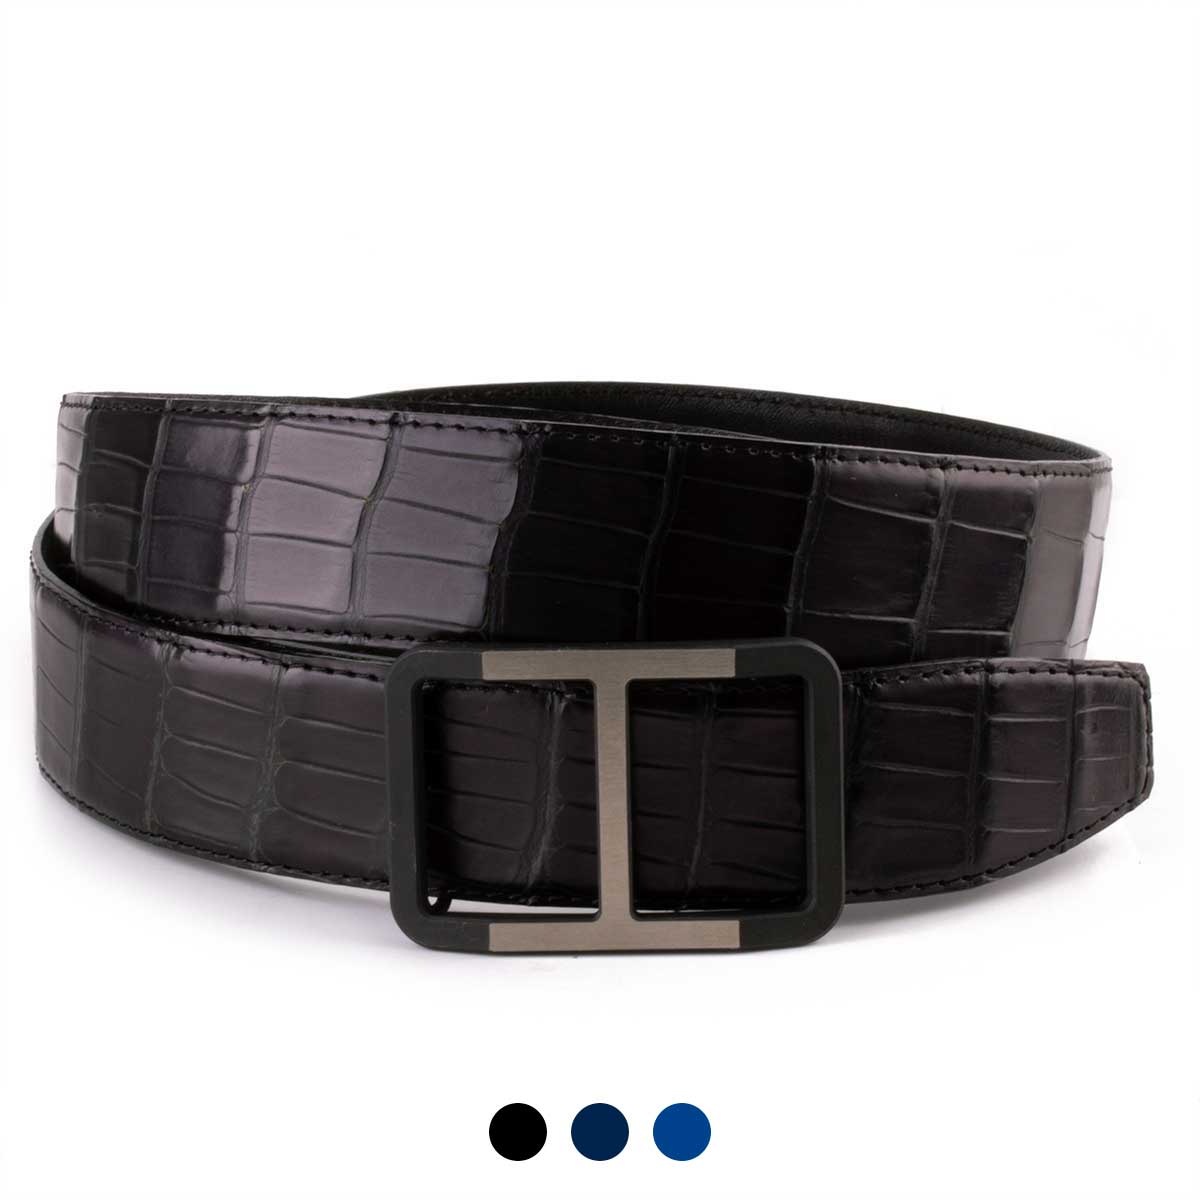 Classic leather belt with black and steel finish "H" buckle - Alligator (black, navy blue, blue)